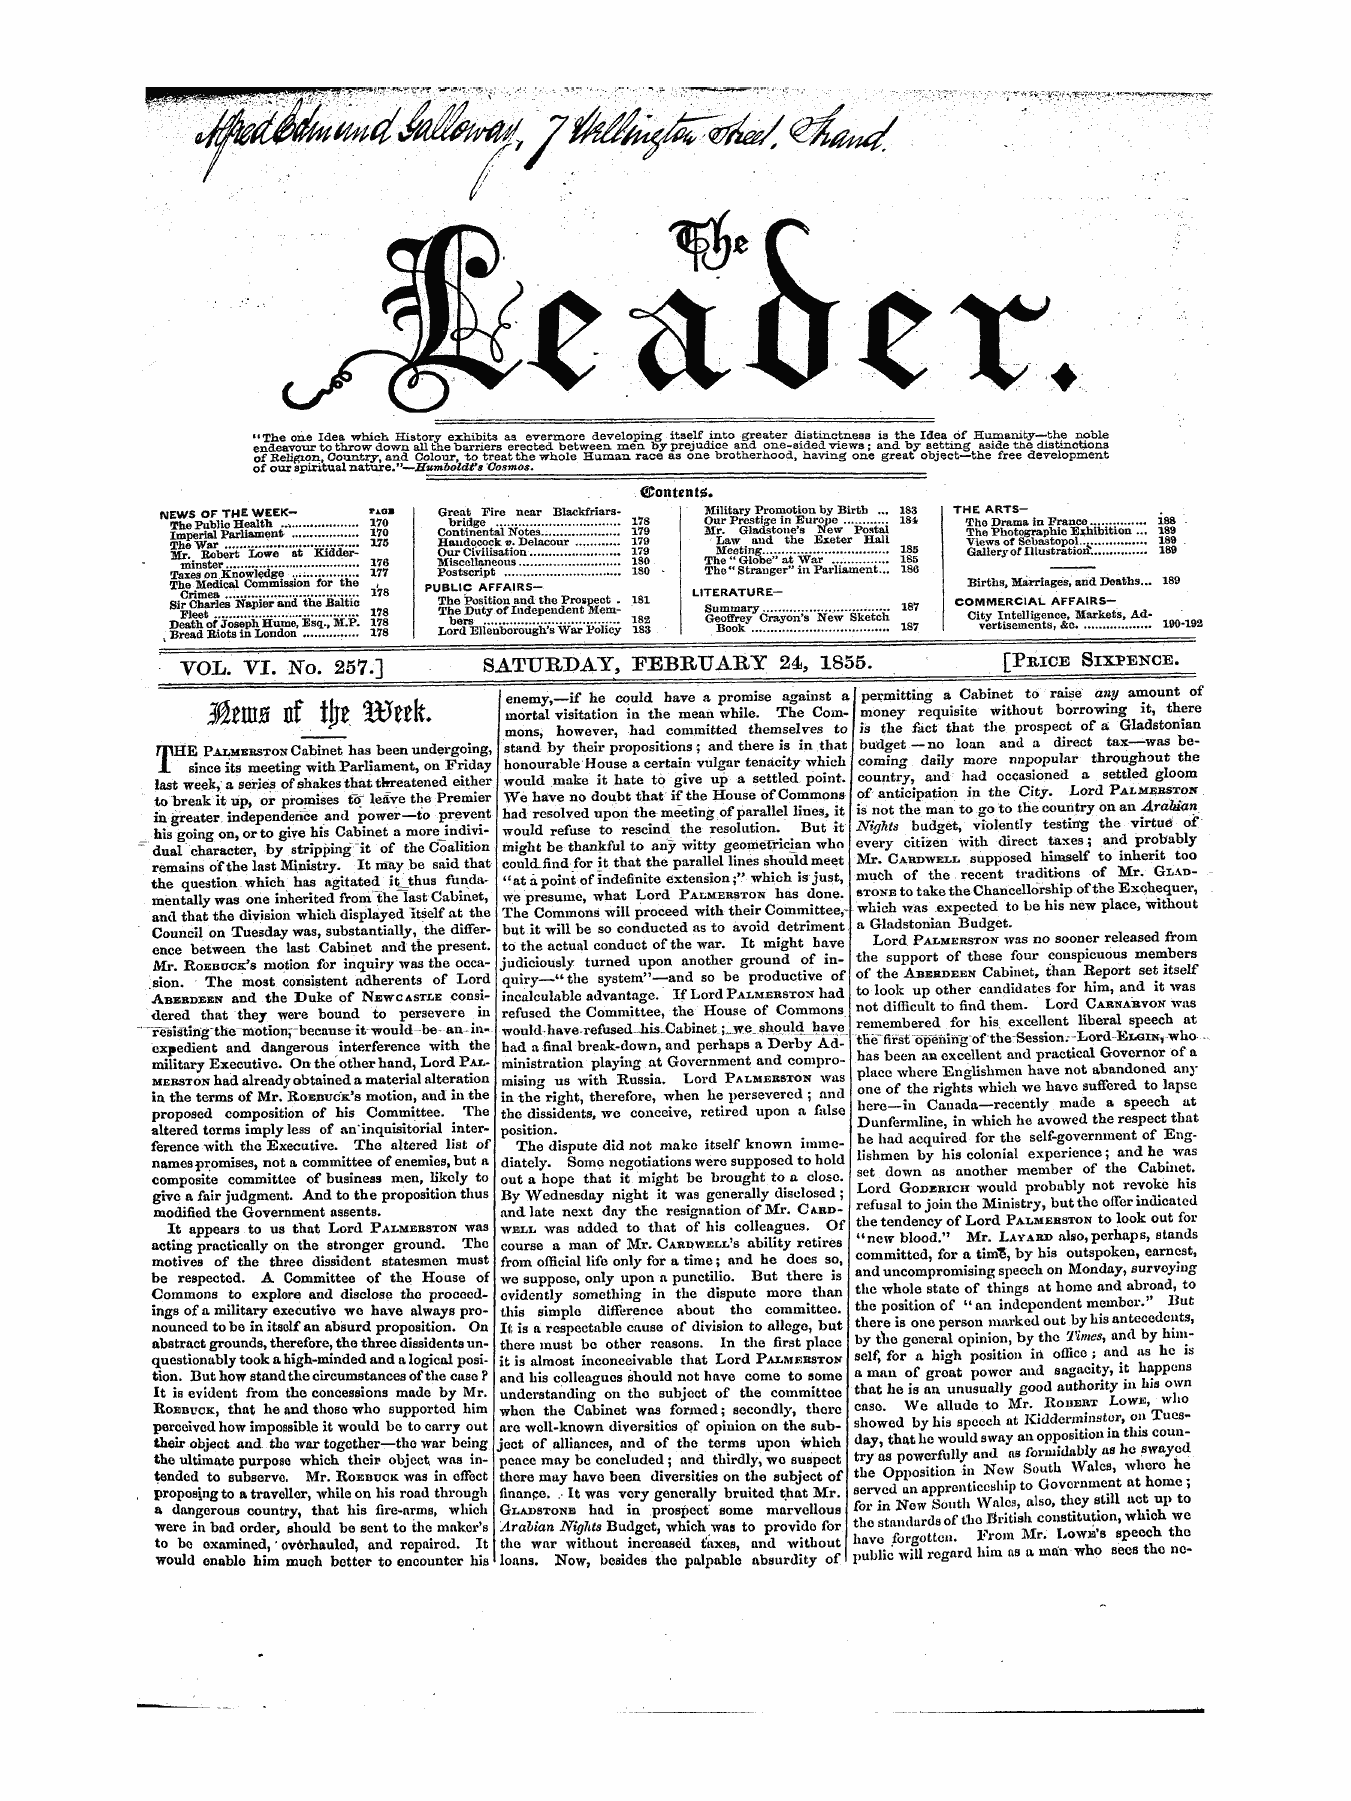 Leader (1850-1860): jS F Y, 1st edition - Contents.